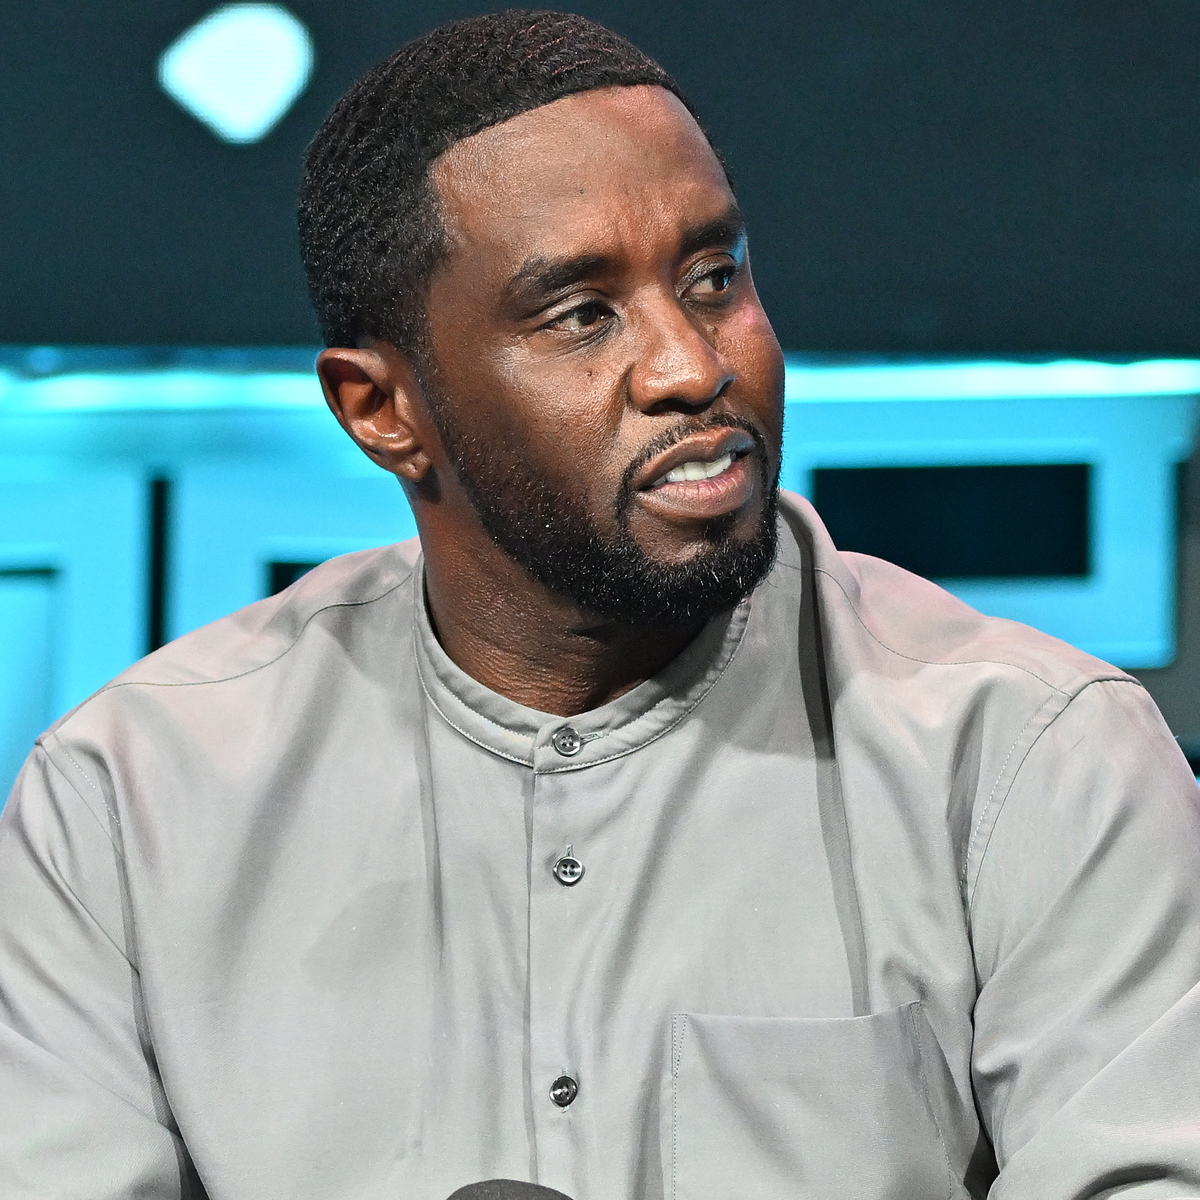 Sean Diddy Combs sued by model accusing him of sexual assault